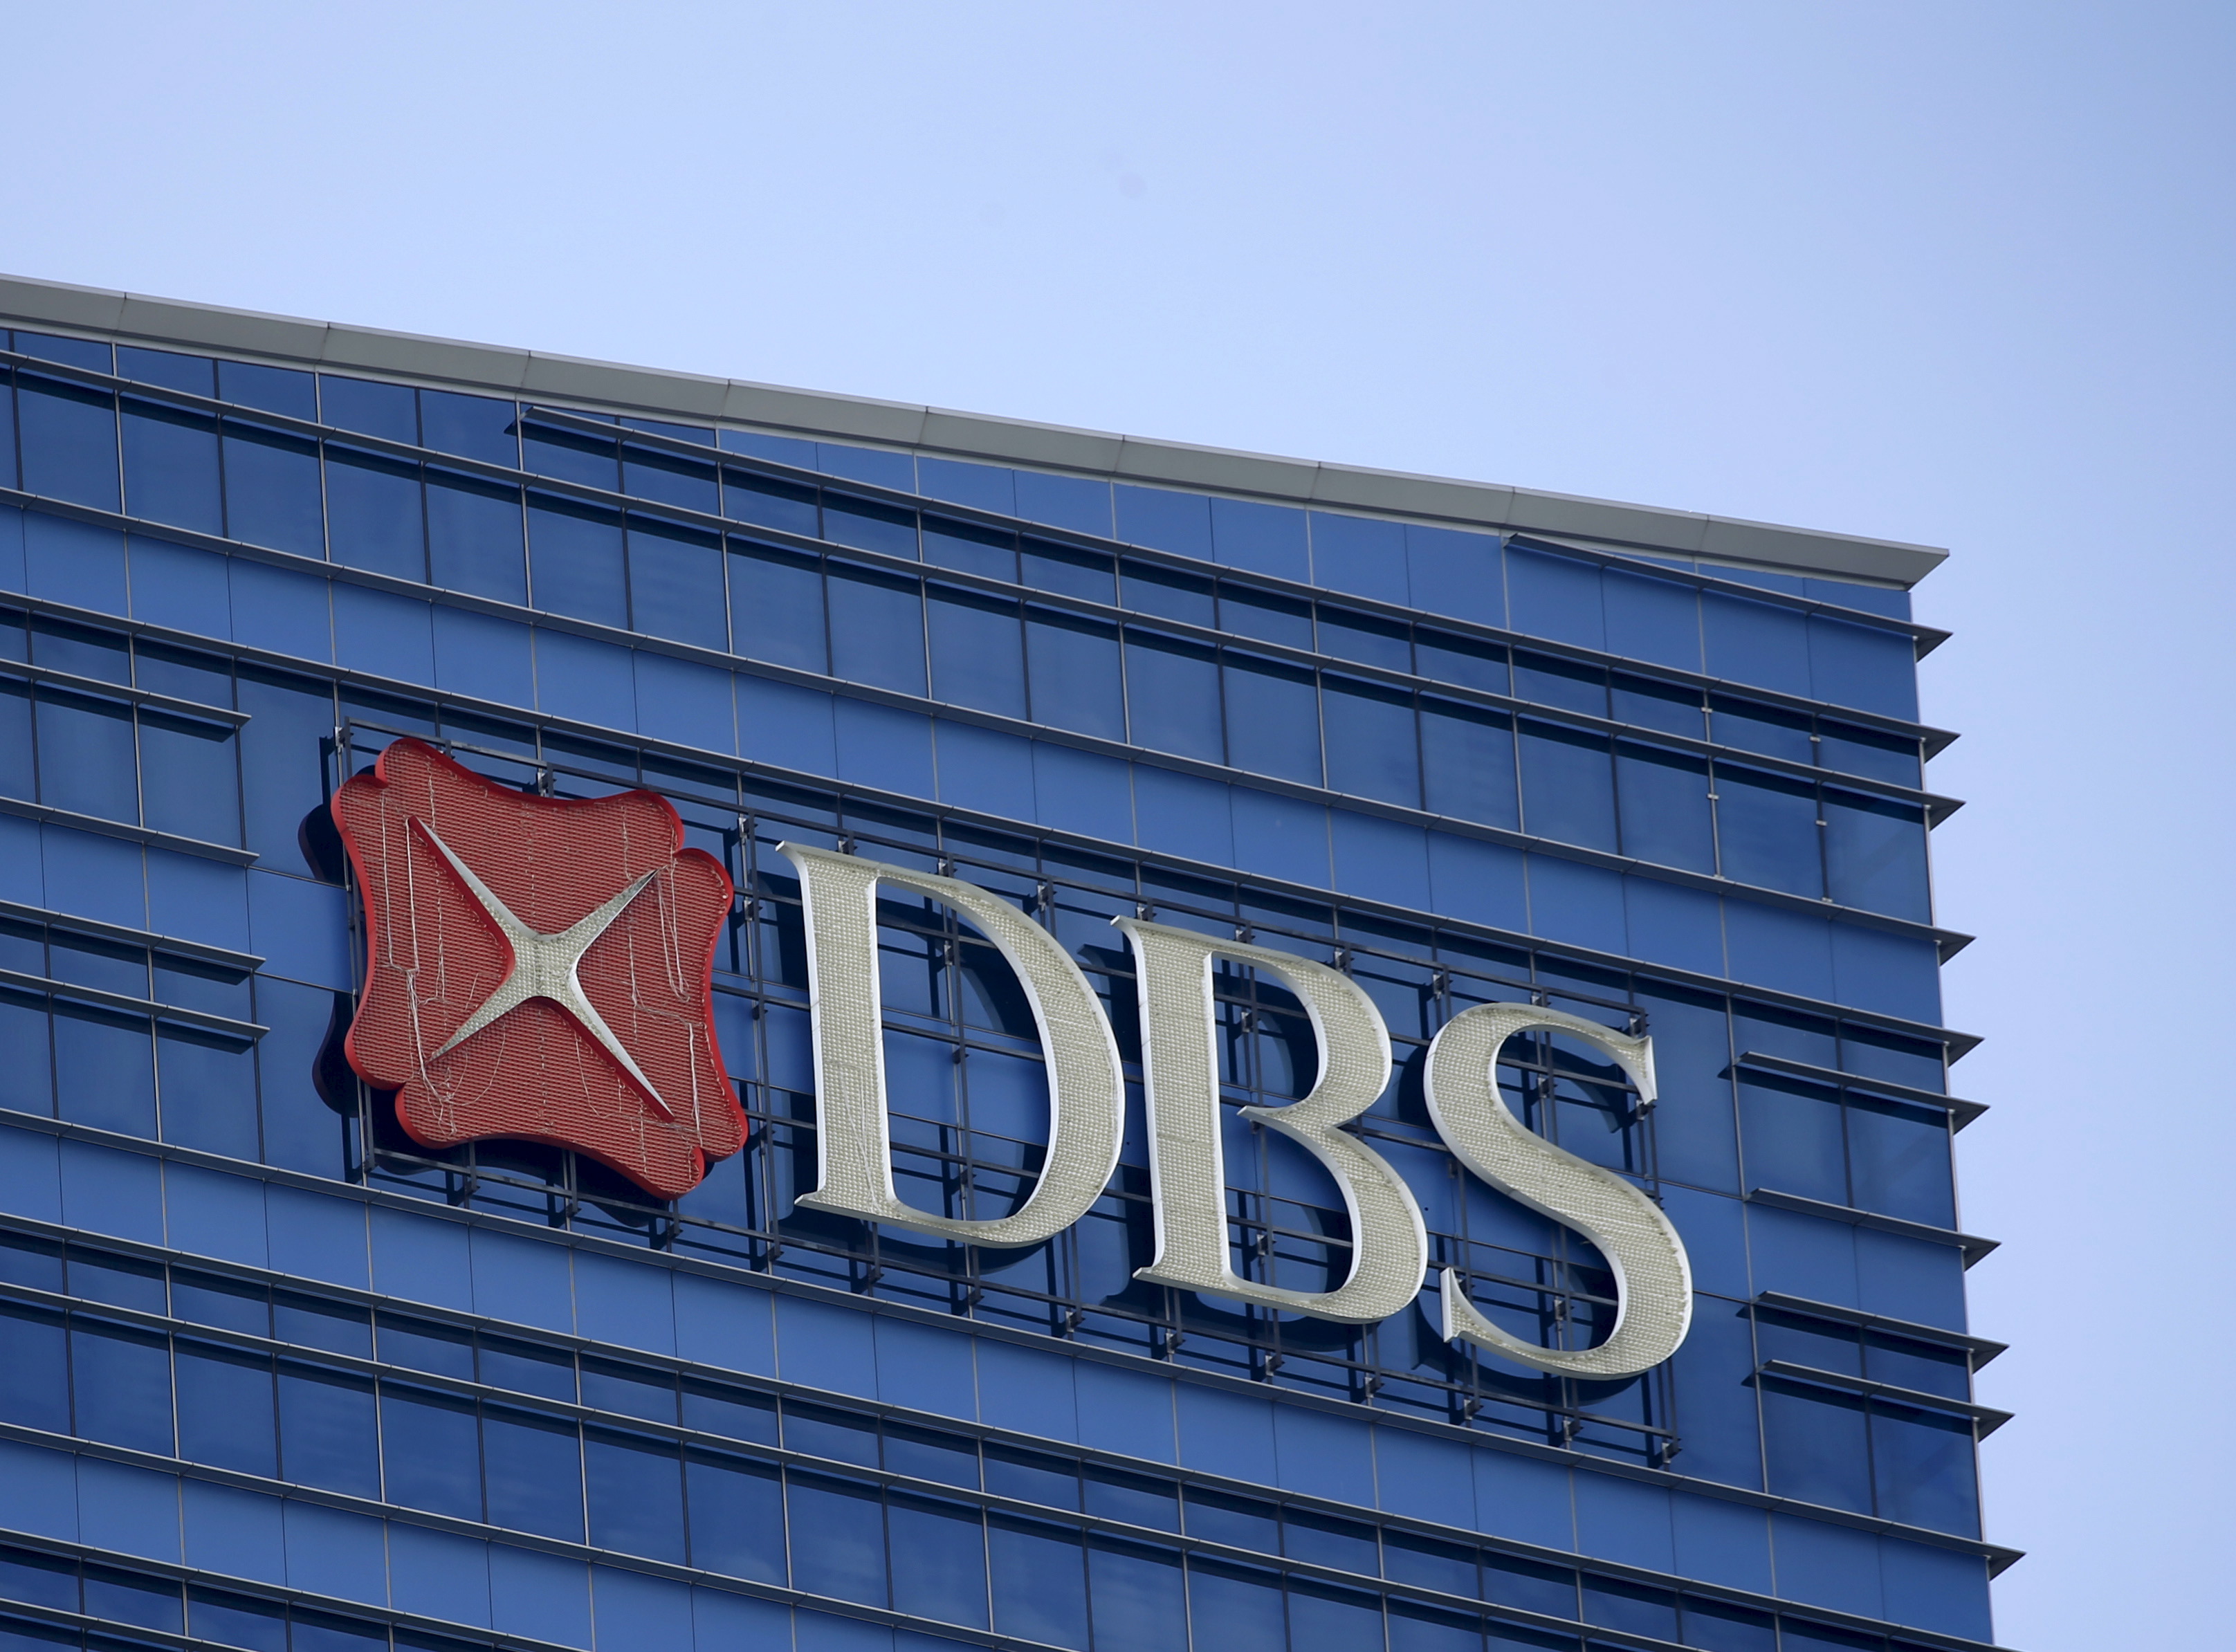 A DBS logo on their office building in Singapore, February 22, 2016. DBS Group Holdings, Singapore's biggest lender, posted a 20 percent rise in quarterly profit that beat expectations, as its net interest margin rose to a five-year high. REUTERS/Edgar Su